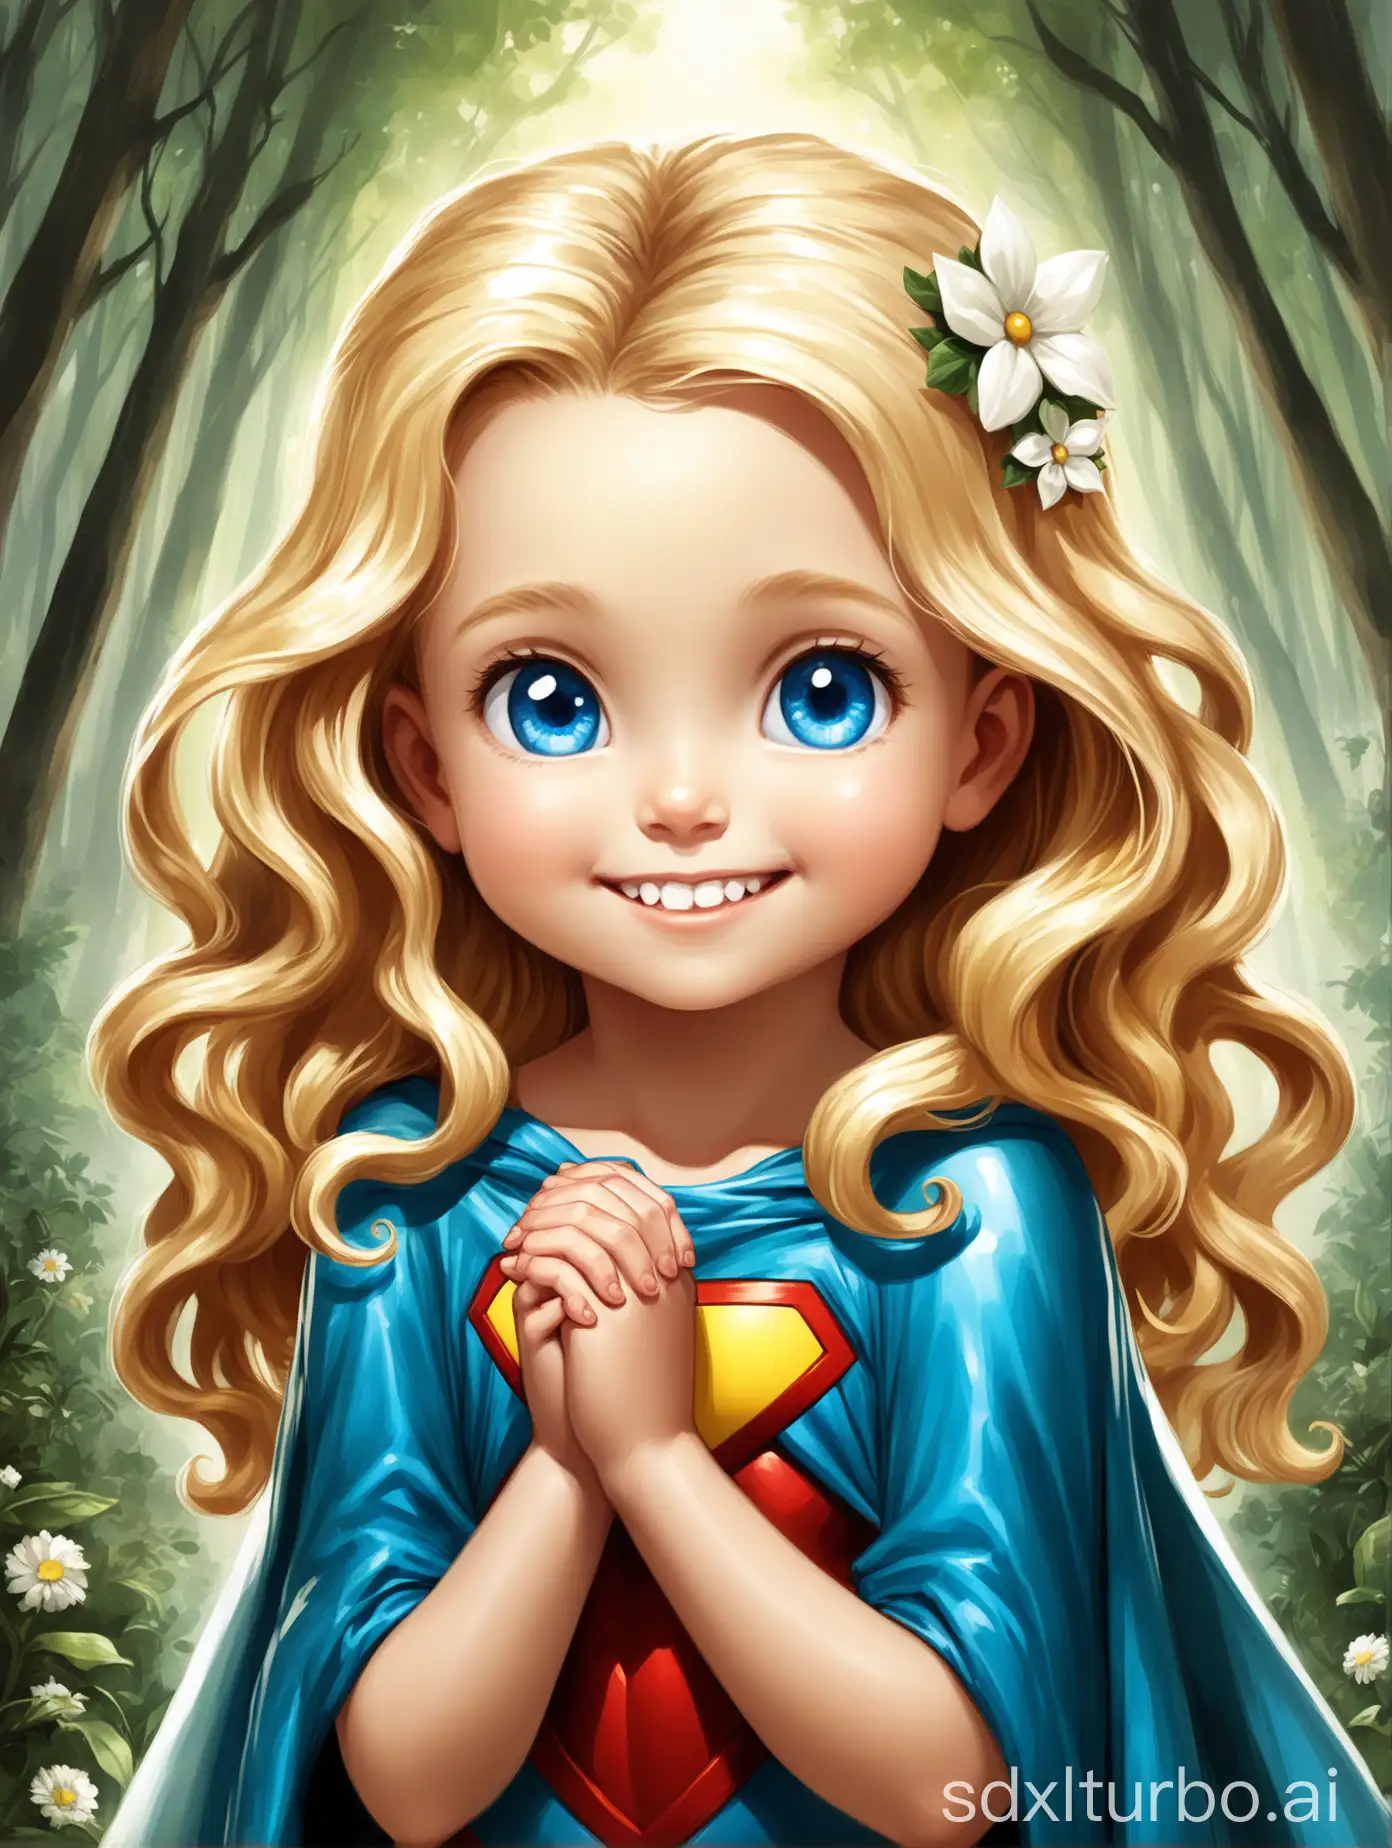 Create an illustration of a superhero for a children’s storybook. The superhero, Emily, is standing in a forest. These are her physical features:  a young Caucasian female, likely in the early childhood age range, possibly between 3 to 5 years old. She has long curly blonde hair that cascades down past her shoulders. A white flower hair accessory adorns the right side of her hair. Her facial features display joy with a wide, toothy smile showing her baby teeth, and her blue eyes glisten with a reflection of light, suggesting she is looking into a bright environment or possibly at a photographer's flash. Her eyebrows are light in color, which is common for someone with blonde hair, and her skin tone is fair. The child's cheeks are slightly rosy, possibly due to natural coloration or the result of smiling. The young girl has her hands gently clasped together and presents a relaxed but happy posture.